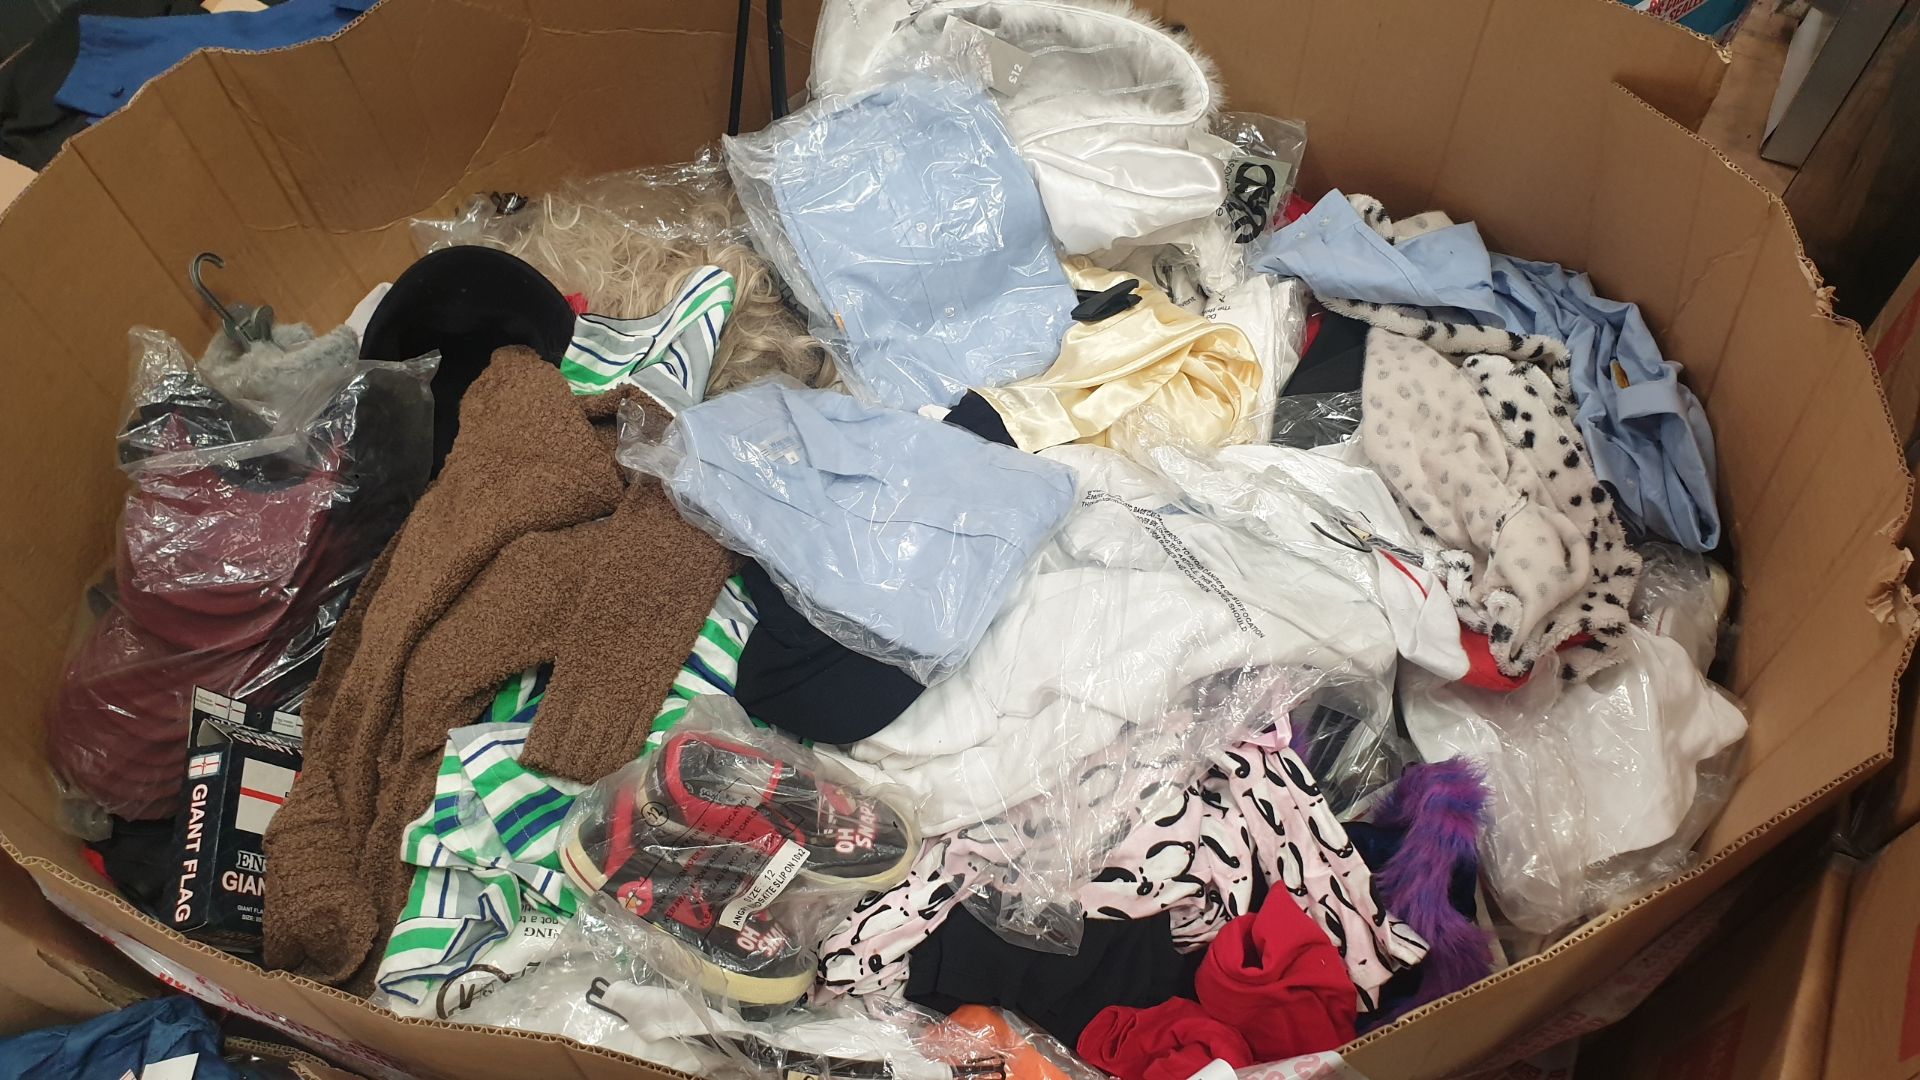 FULL PALLET OF CHILDRENS CLOTHING IE KIDS FOOTWEAR BOOTS/TRAINERS, GILDAN T SHIRTS, ASOS TOPS,